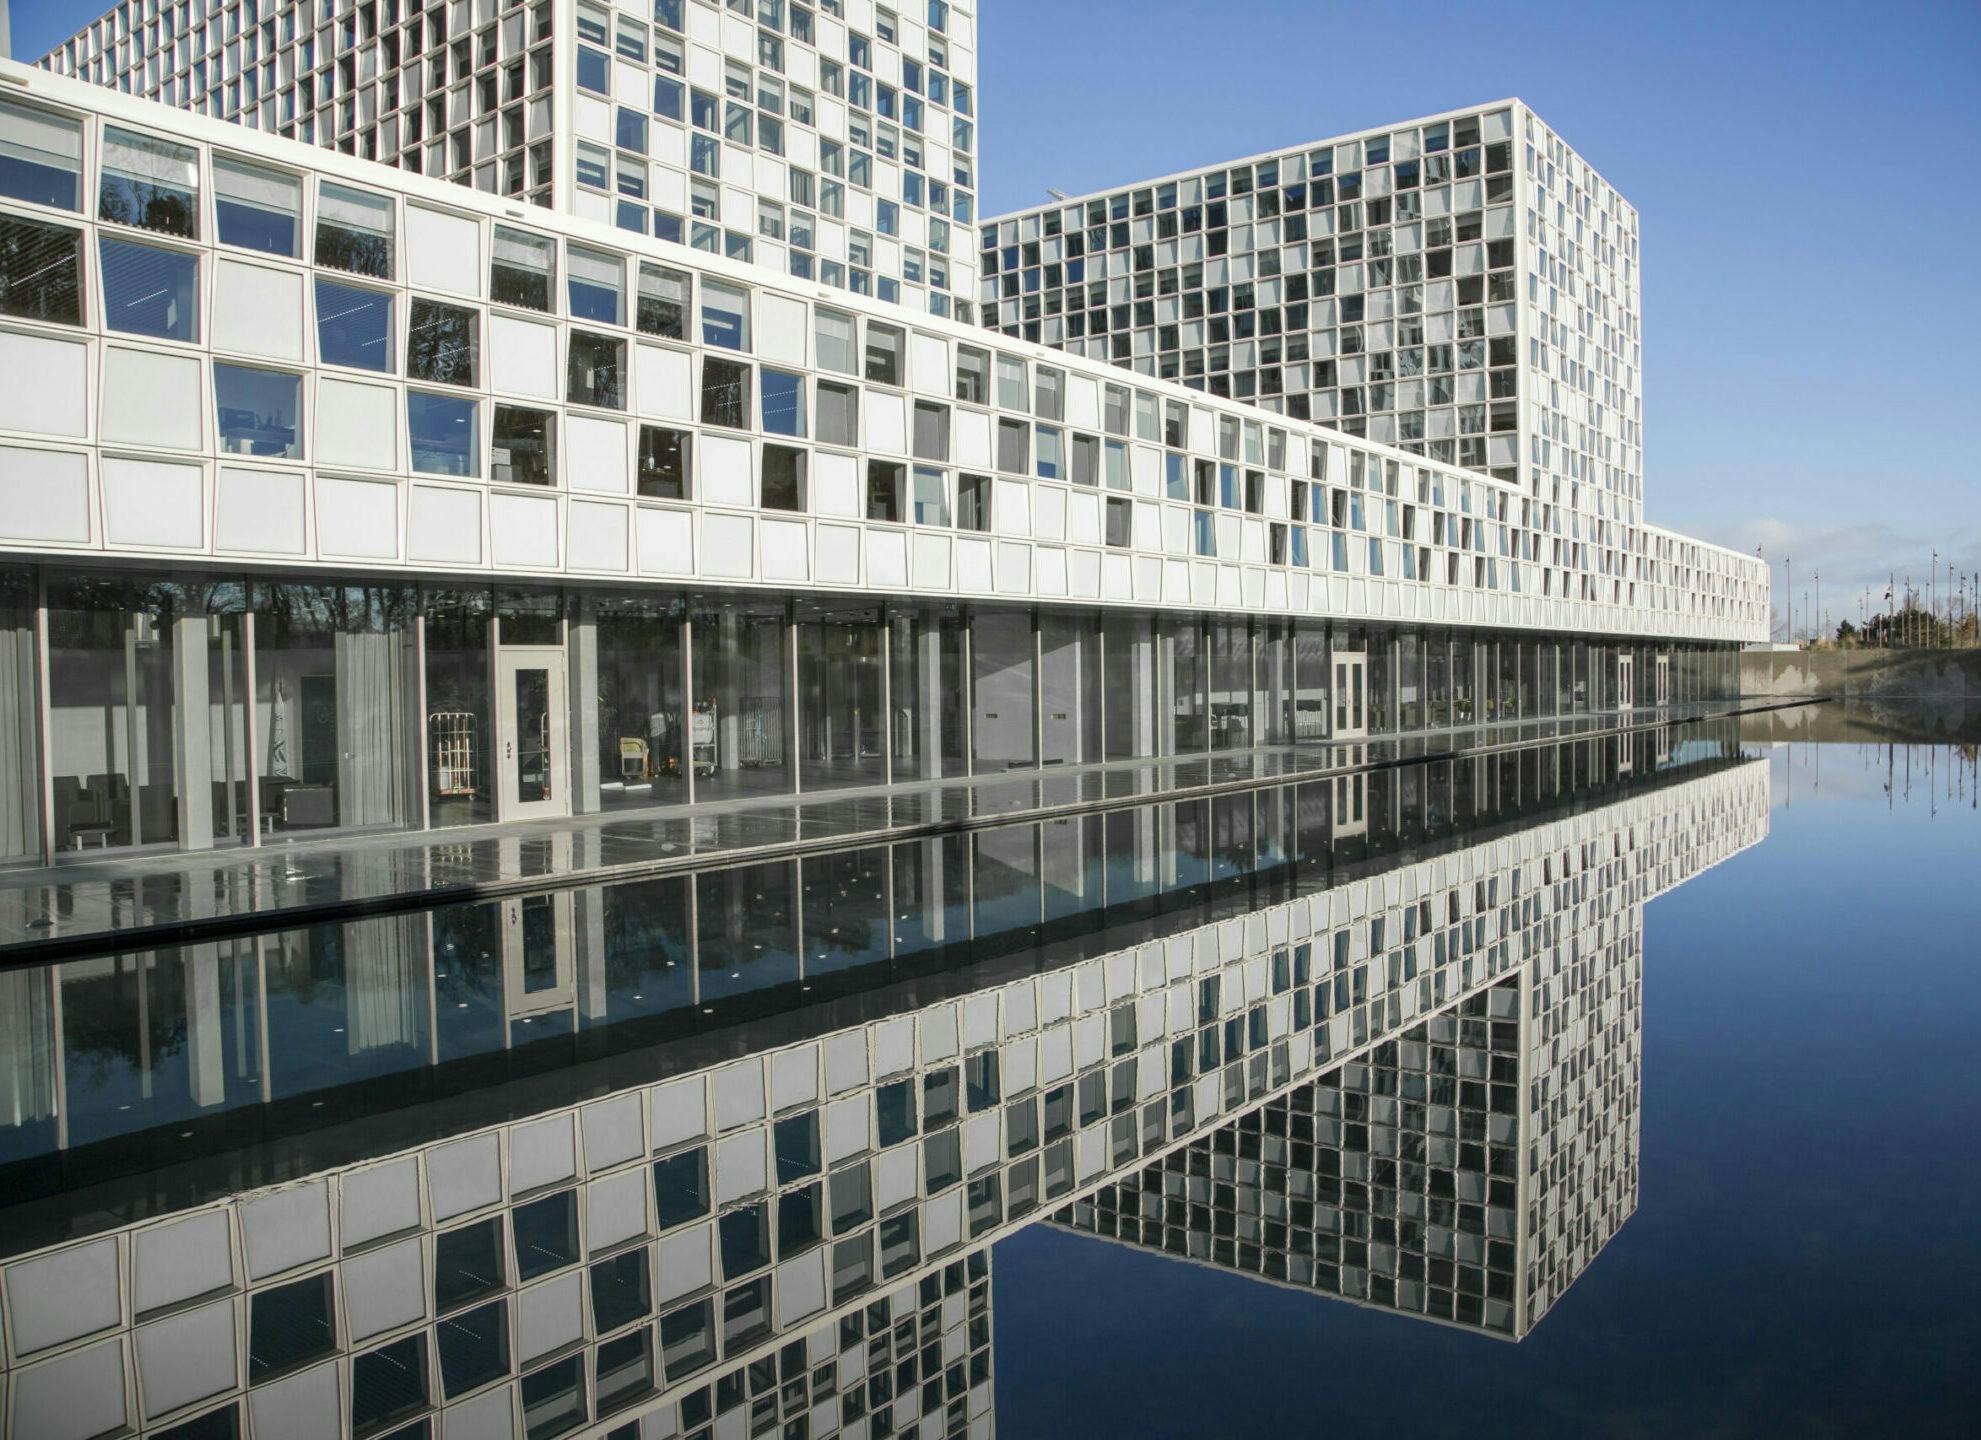 The building of the International Criminal Court.